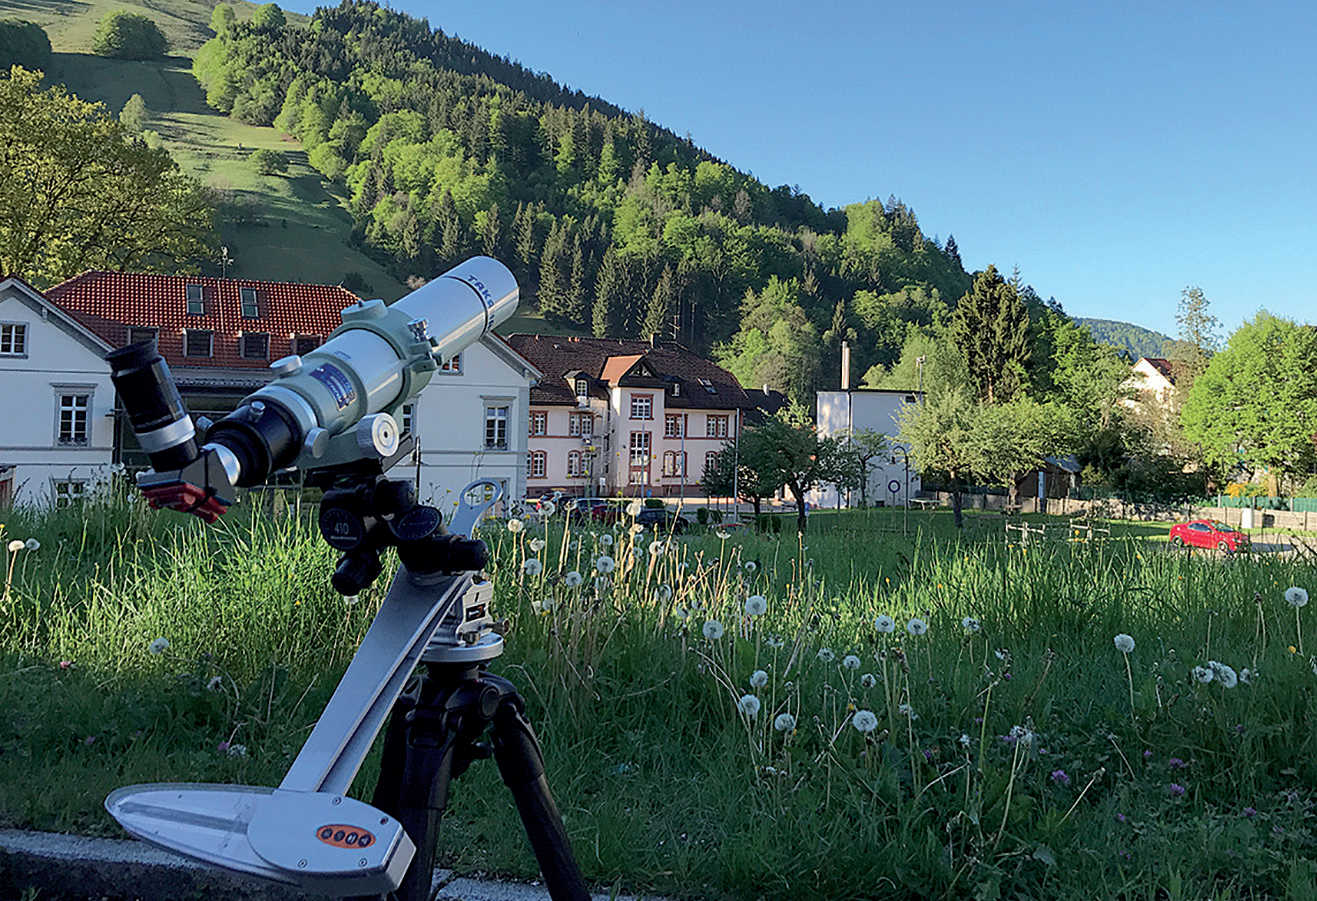 The equipment used to create the first picture: a Takahashi FS-60Q with a focal length of 600mm on an AstroTrack travel mount, the camera is a Point Grey Grasshopper GS3-U3-28S5M. For exact alignment, an eyepiece is inserted into the telescope where, later, the camera will be positioned. U. Dittler